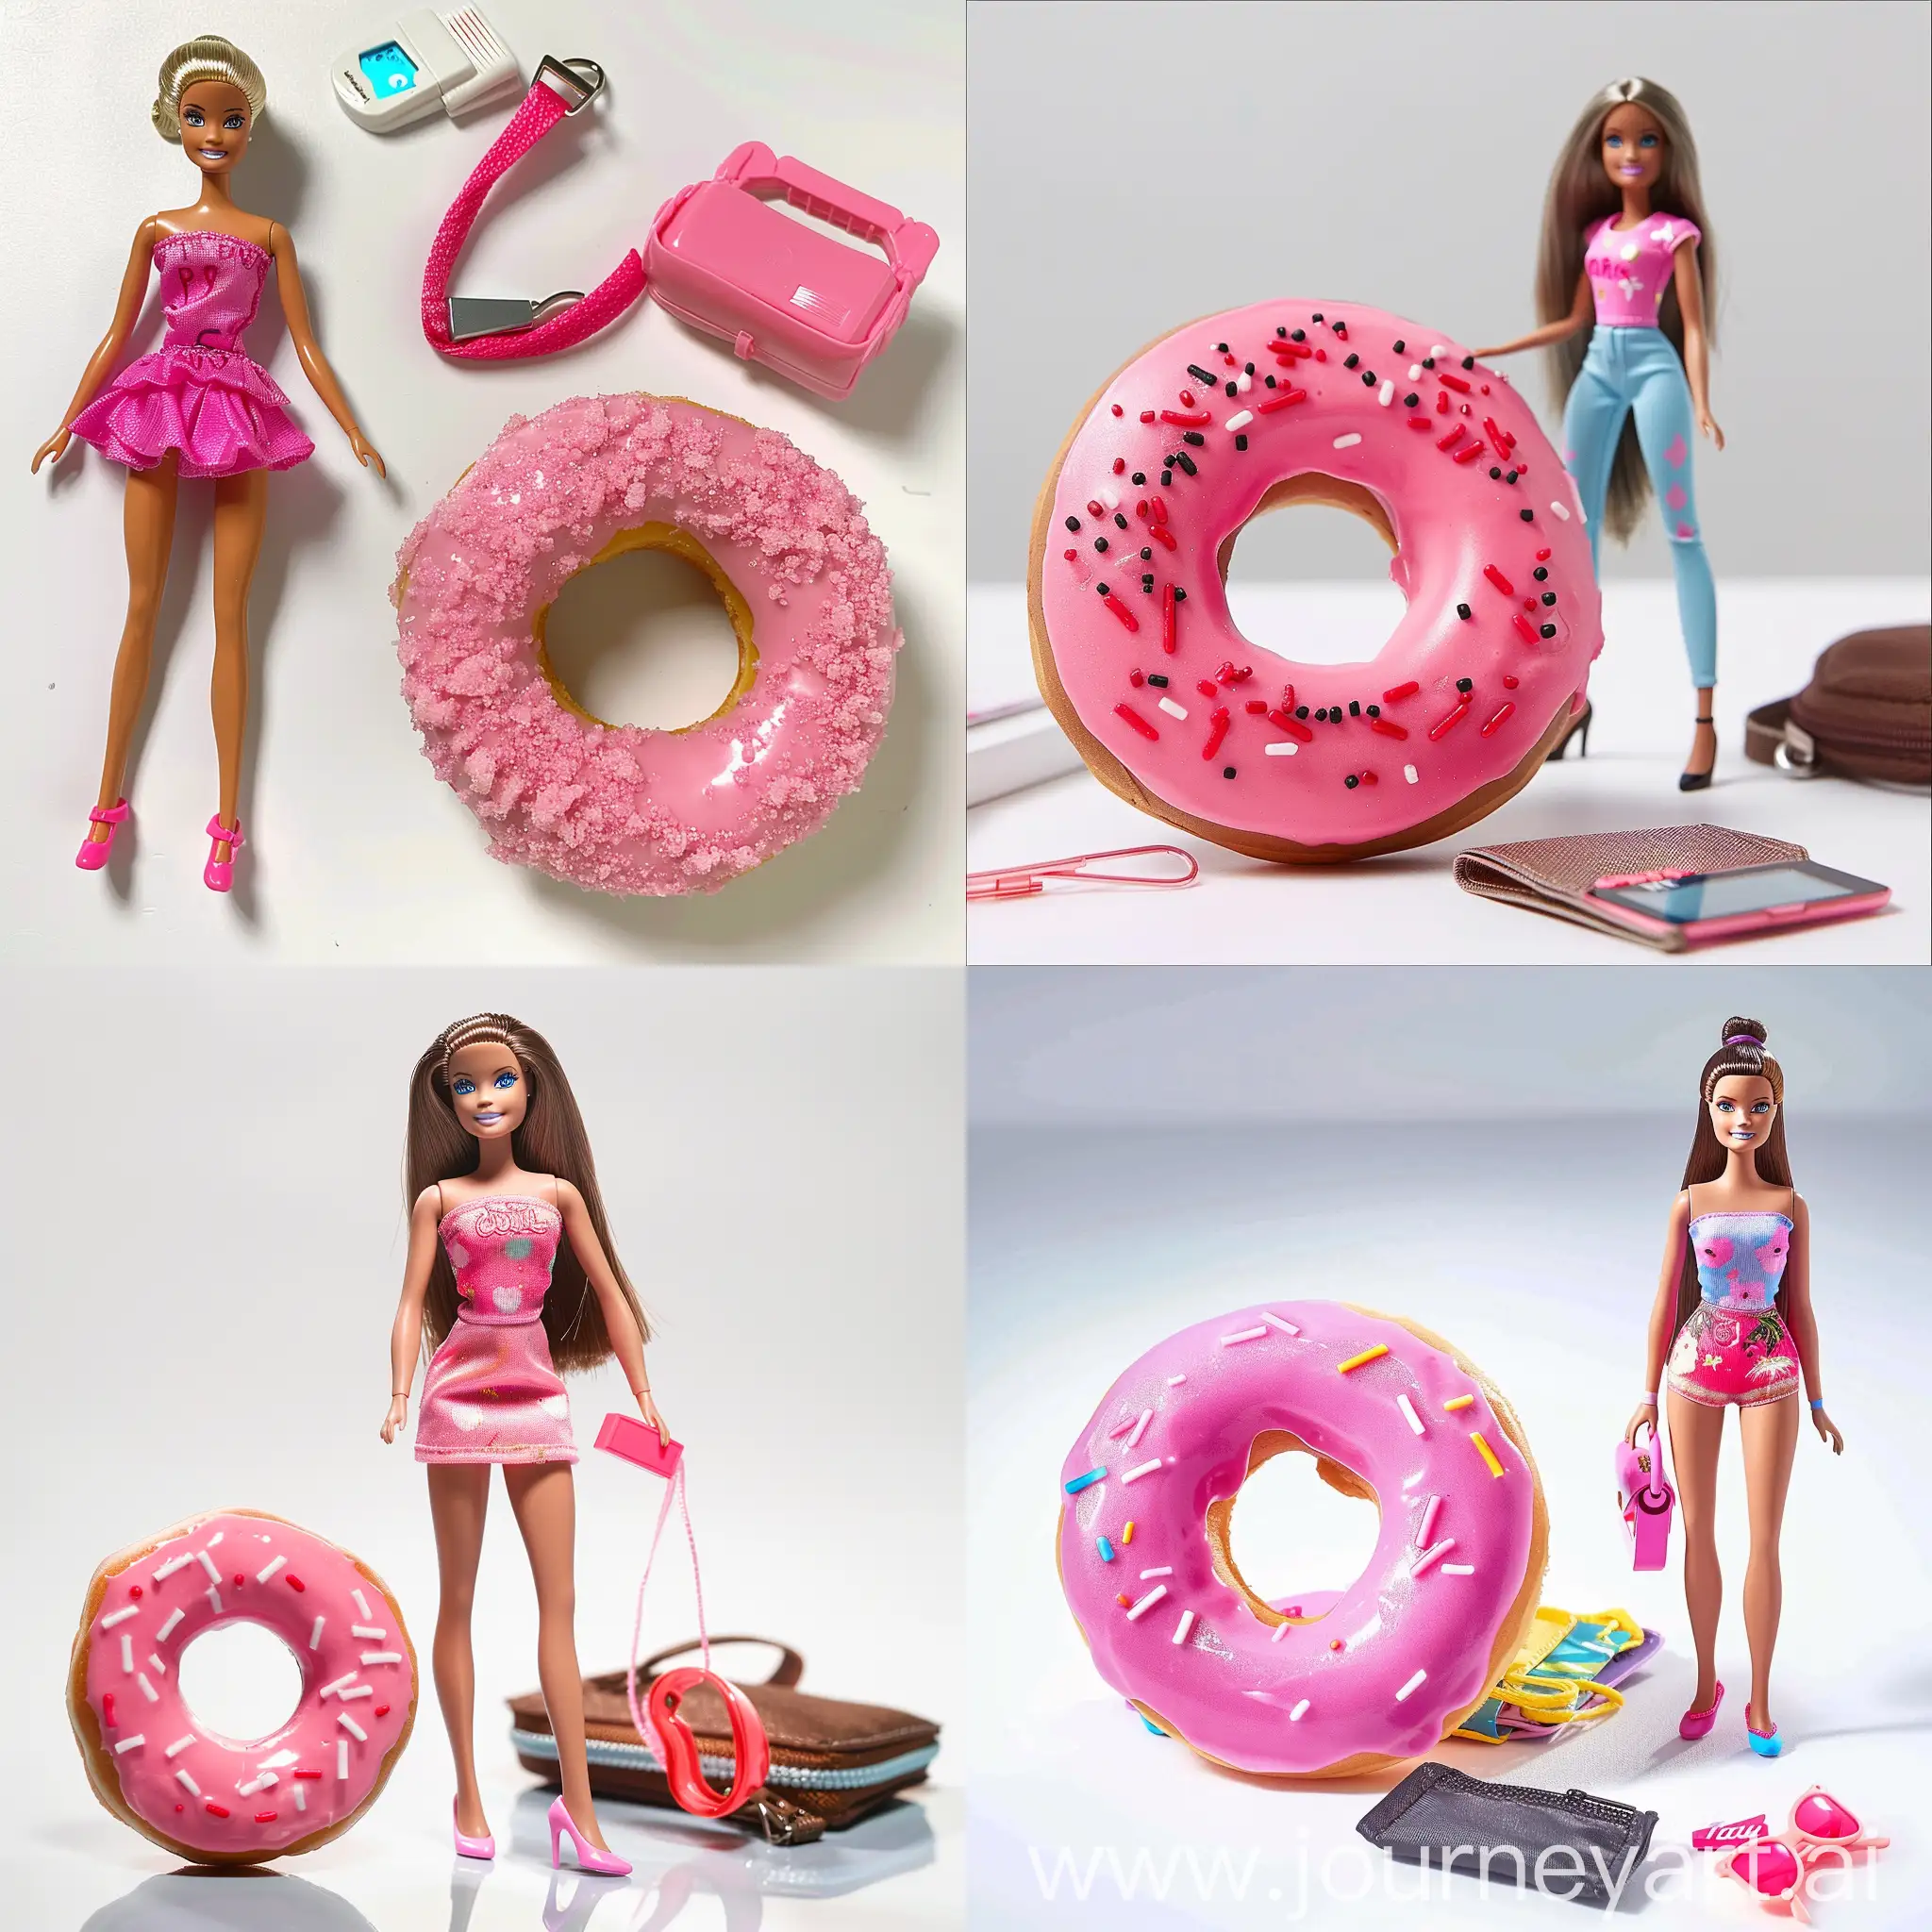 Barbie-Doll-with-Pink-Donut-Sweet-Treat-and-Fashion-Accessories-on-White-Background